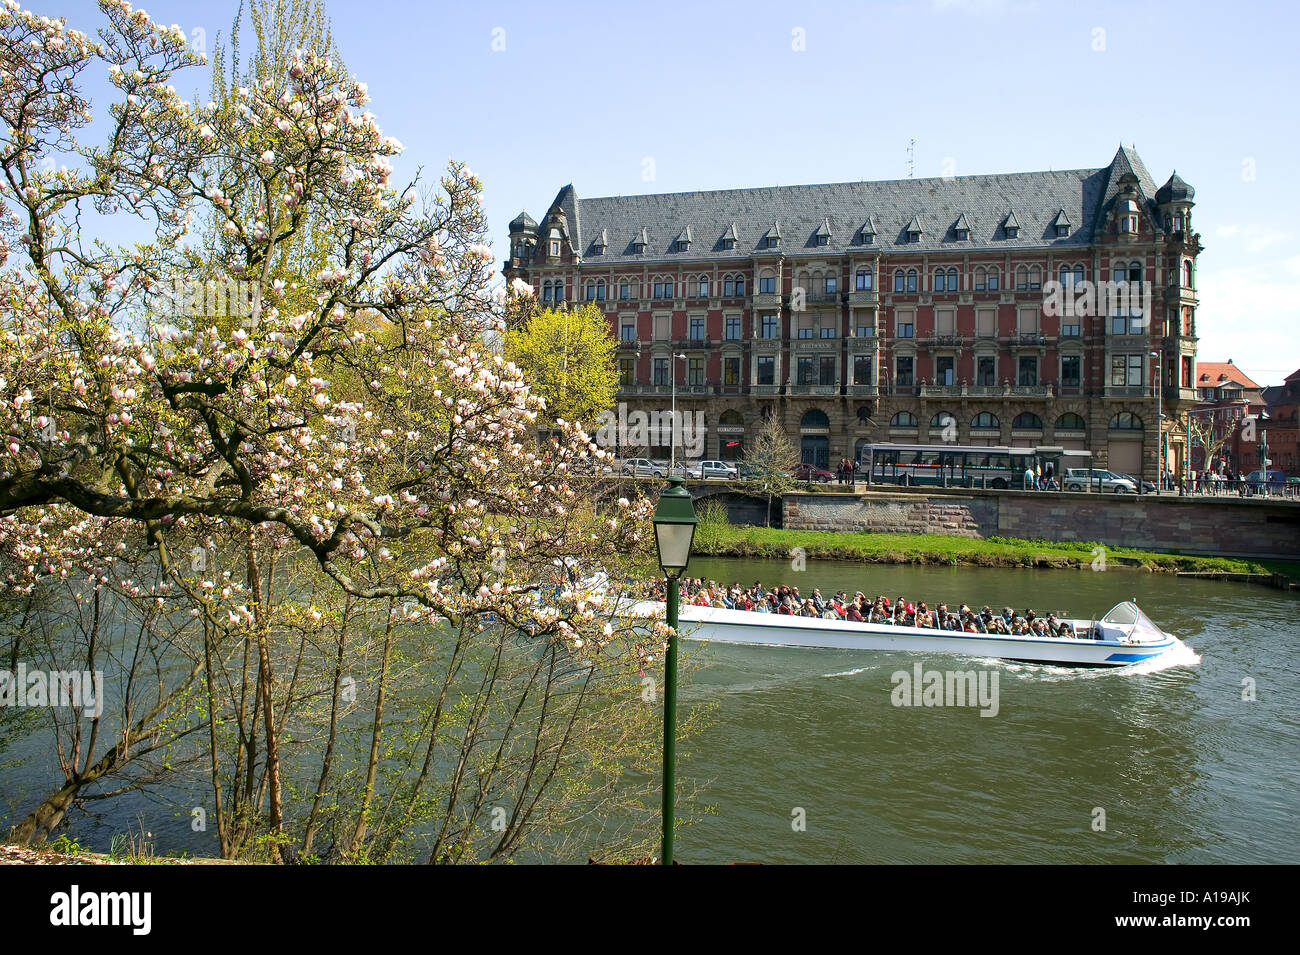 Batorama tour boat on Ill river and Gallia student residence, Neustadt district, Strasbourg, Alsace, France, Europe, Stock Photo